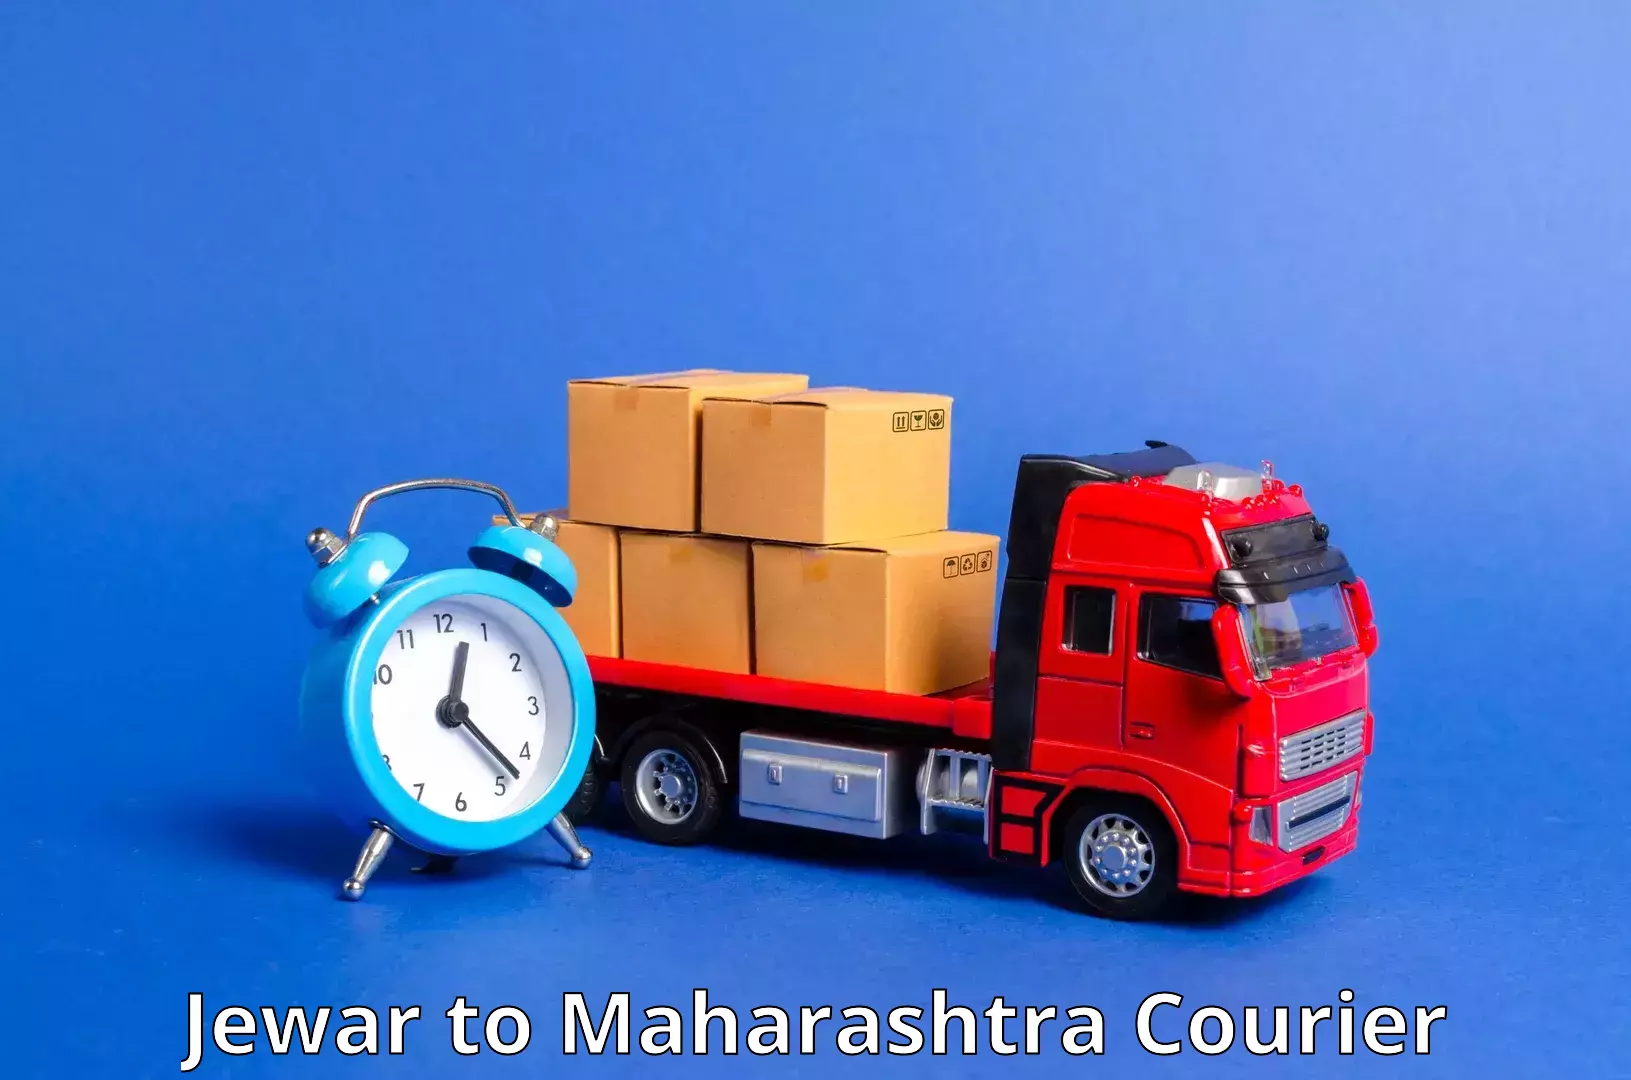 Parcel handling and care in Jewar to Maharashtra